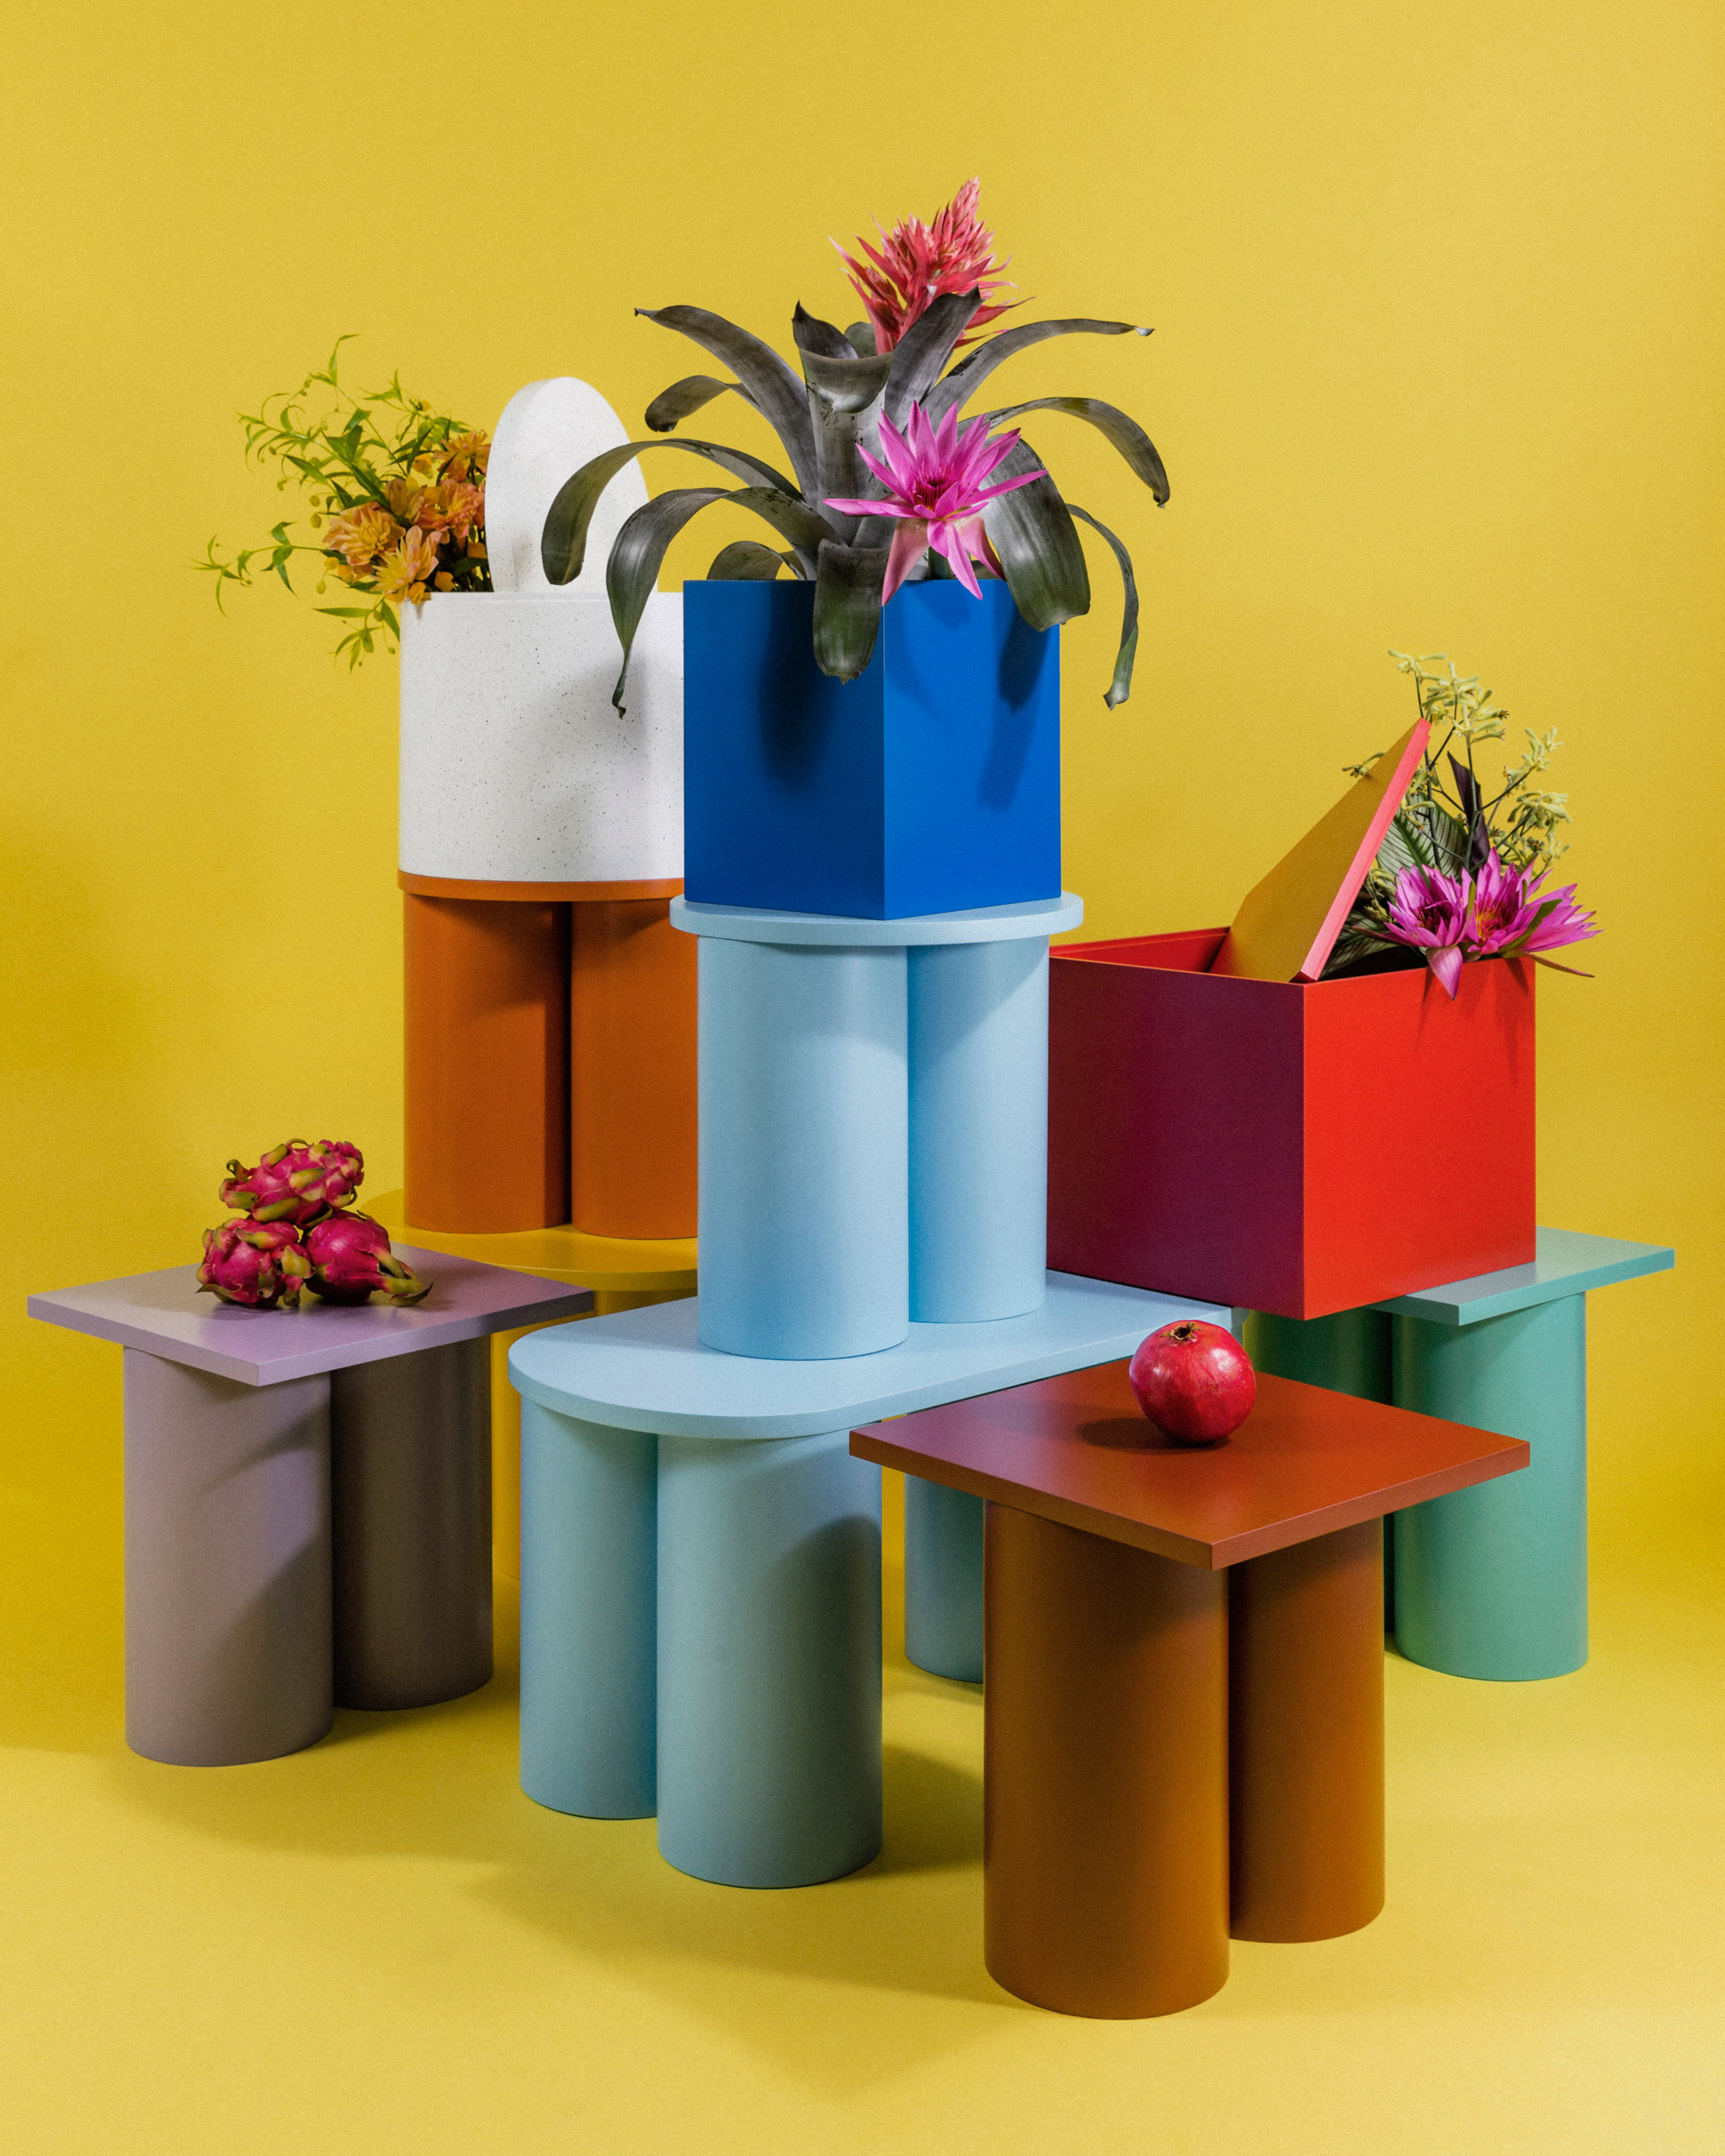 Kamarq launches colourful rentable furniture but pulls items after copying claims